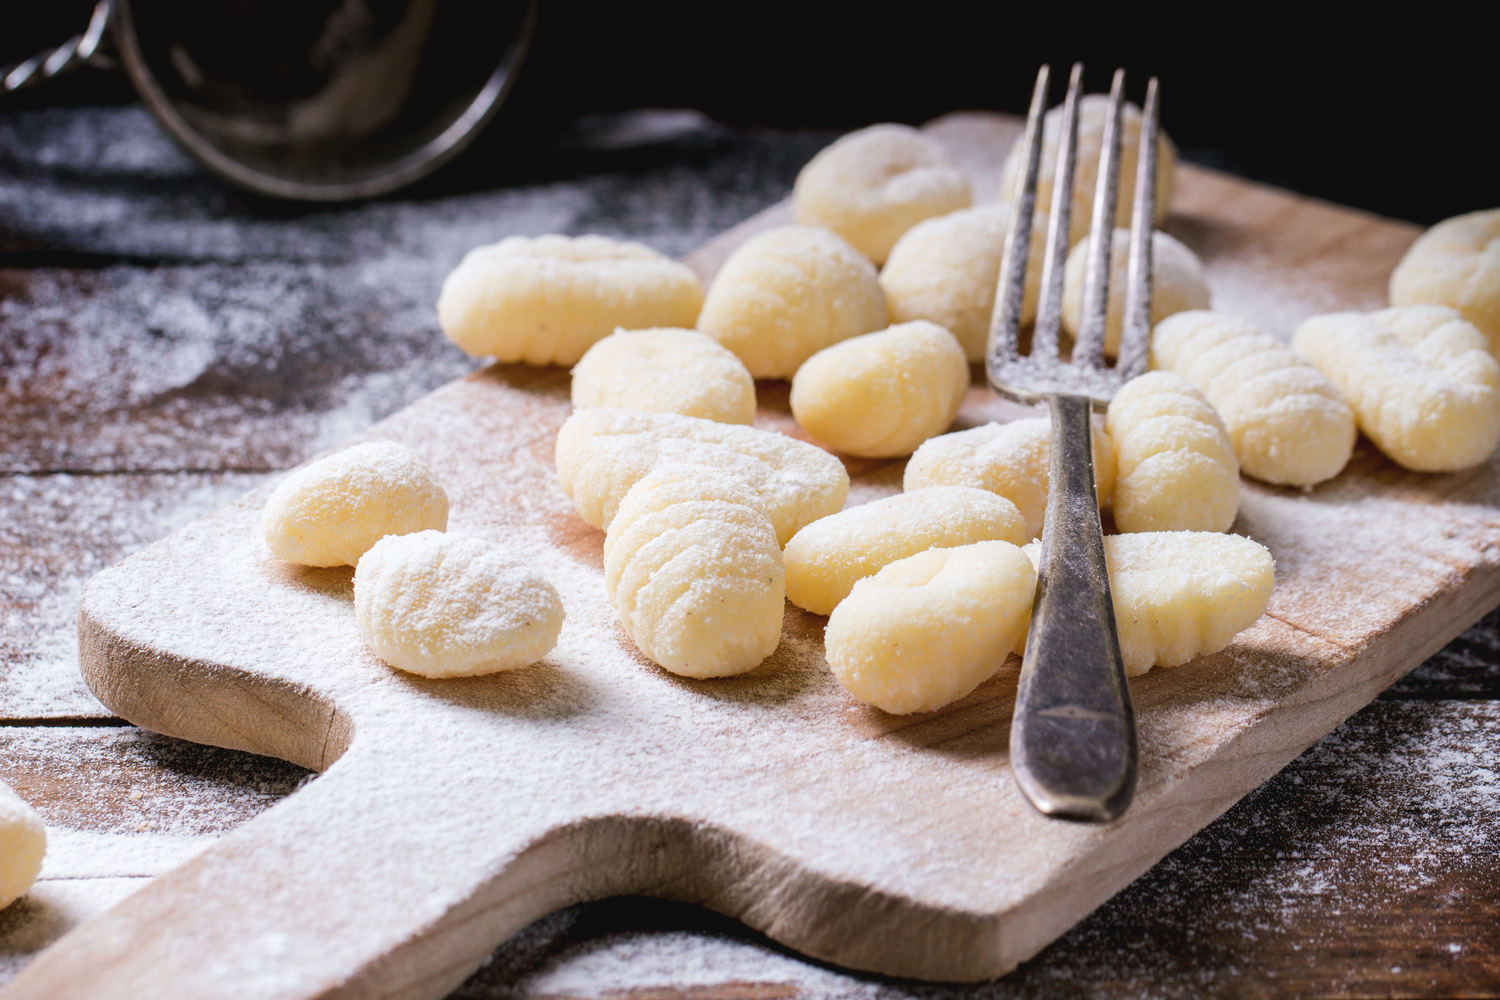 Dandenong Market — Traditional gnocchi with cherry tomatoes